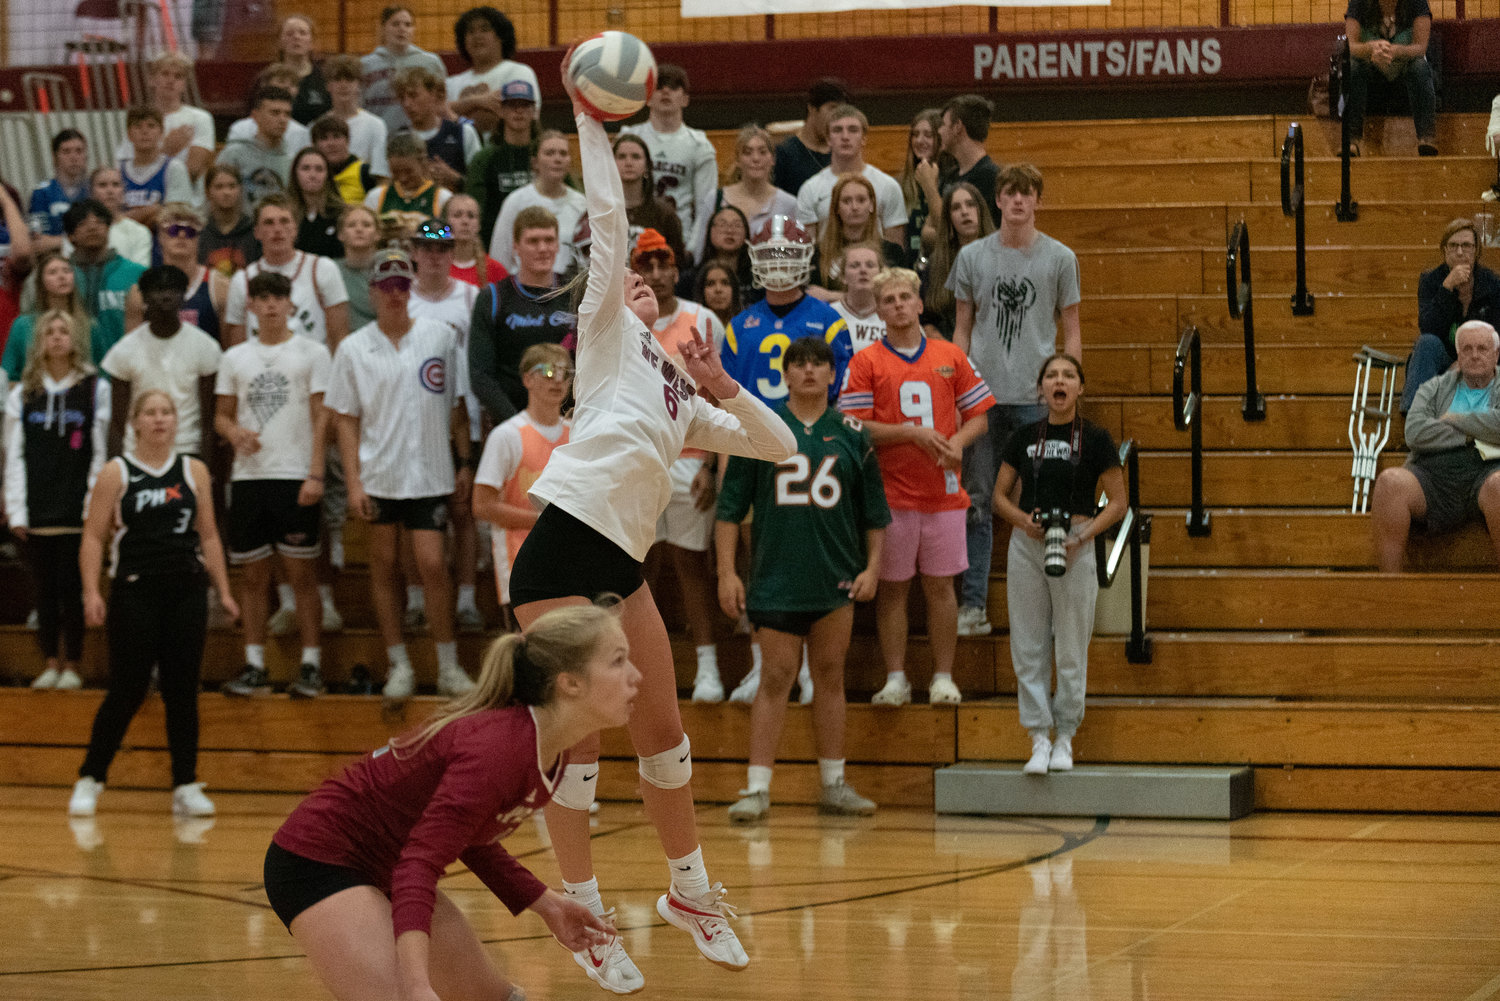 Morgan Rogerson goes up for a spike from distance during W.F. West's five-set win over Centralia on Sept. 22 in Chehalis.